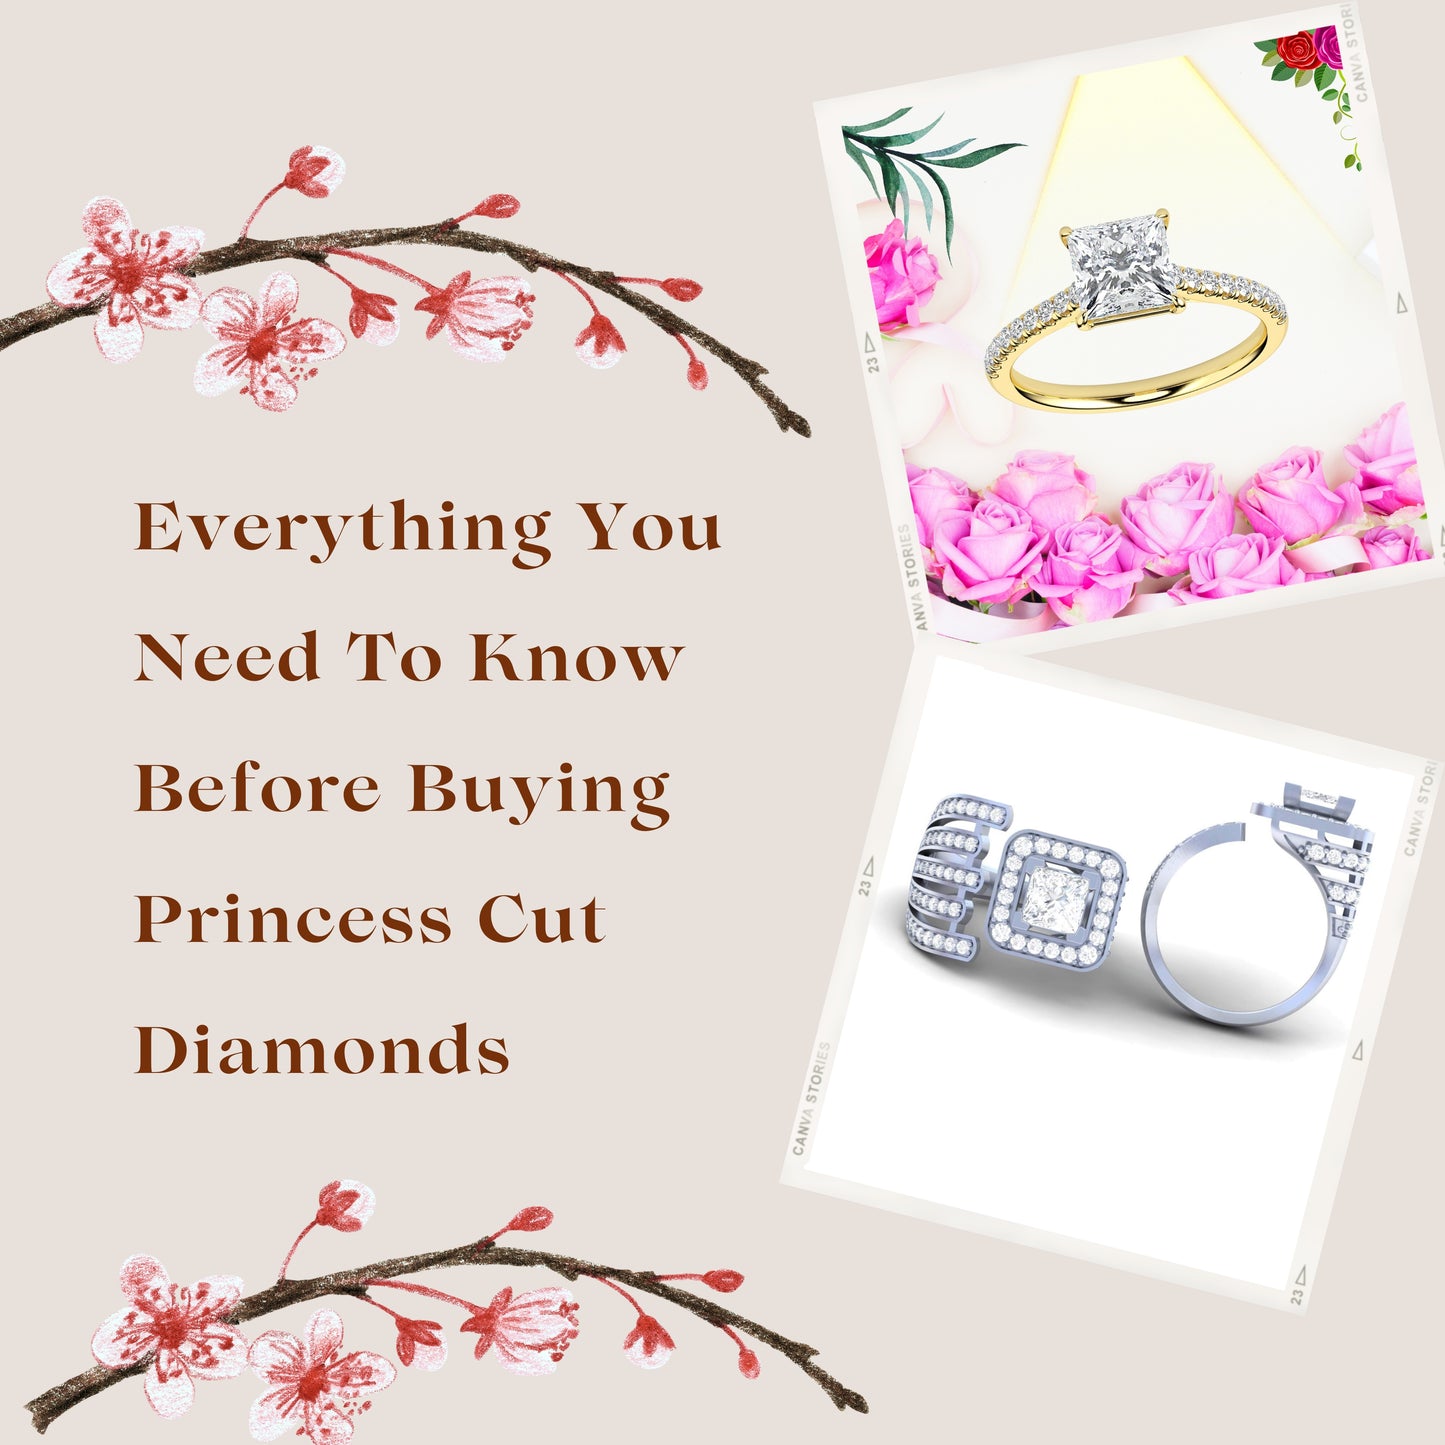 Everything You Need To Know Before Buying Princess Cut Diamonds